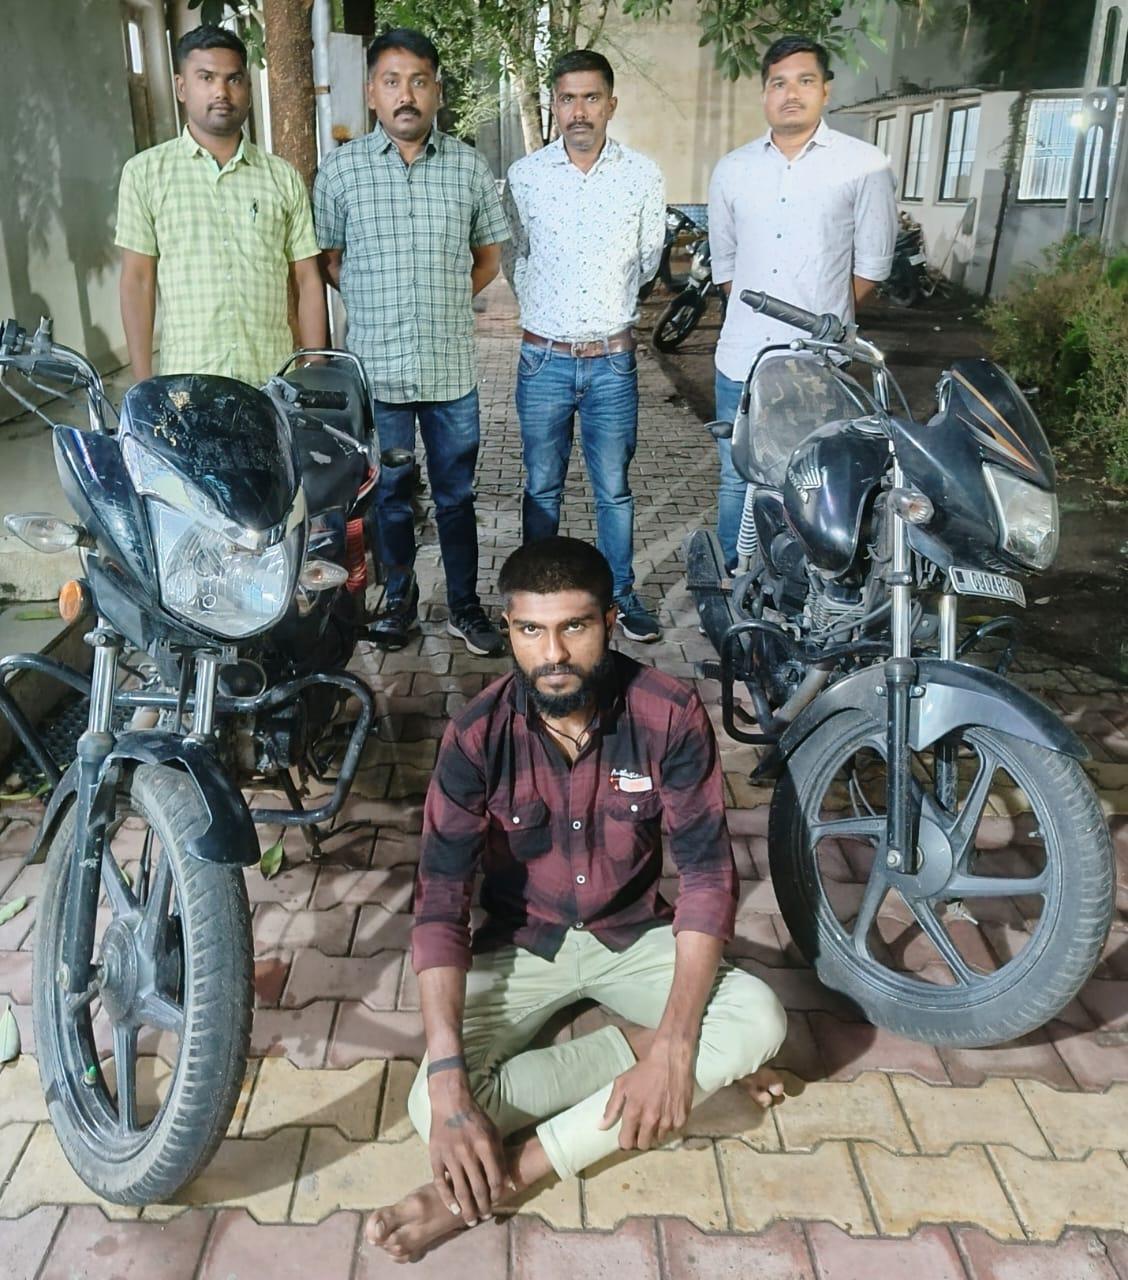 Kuldeep Boricha was caught with two stolen bikes from Nesda village in Sihore